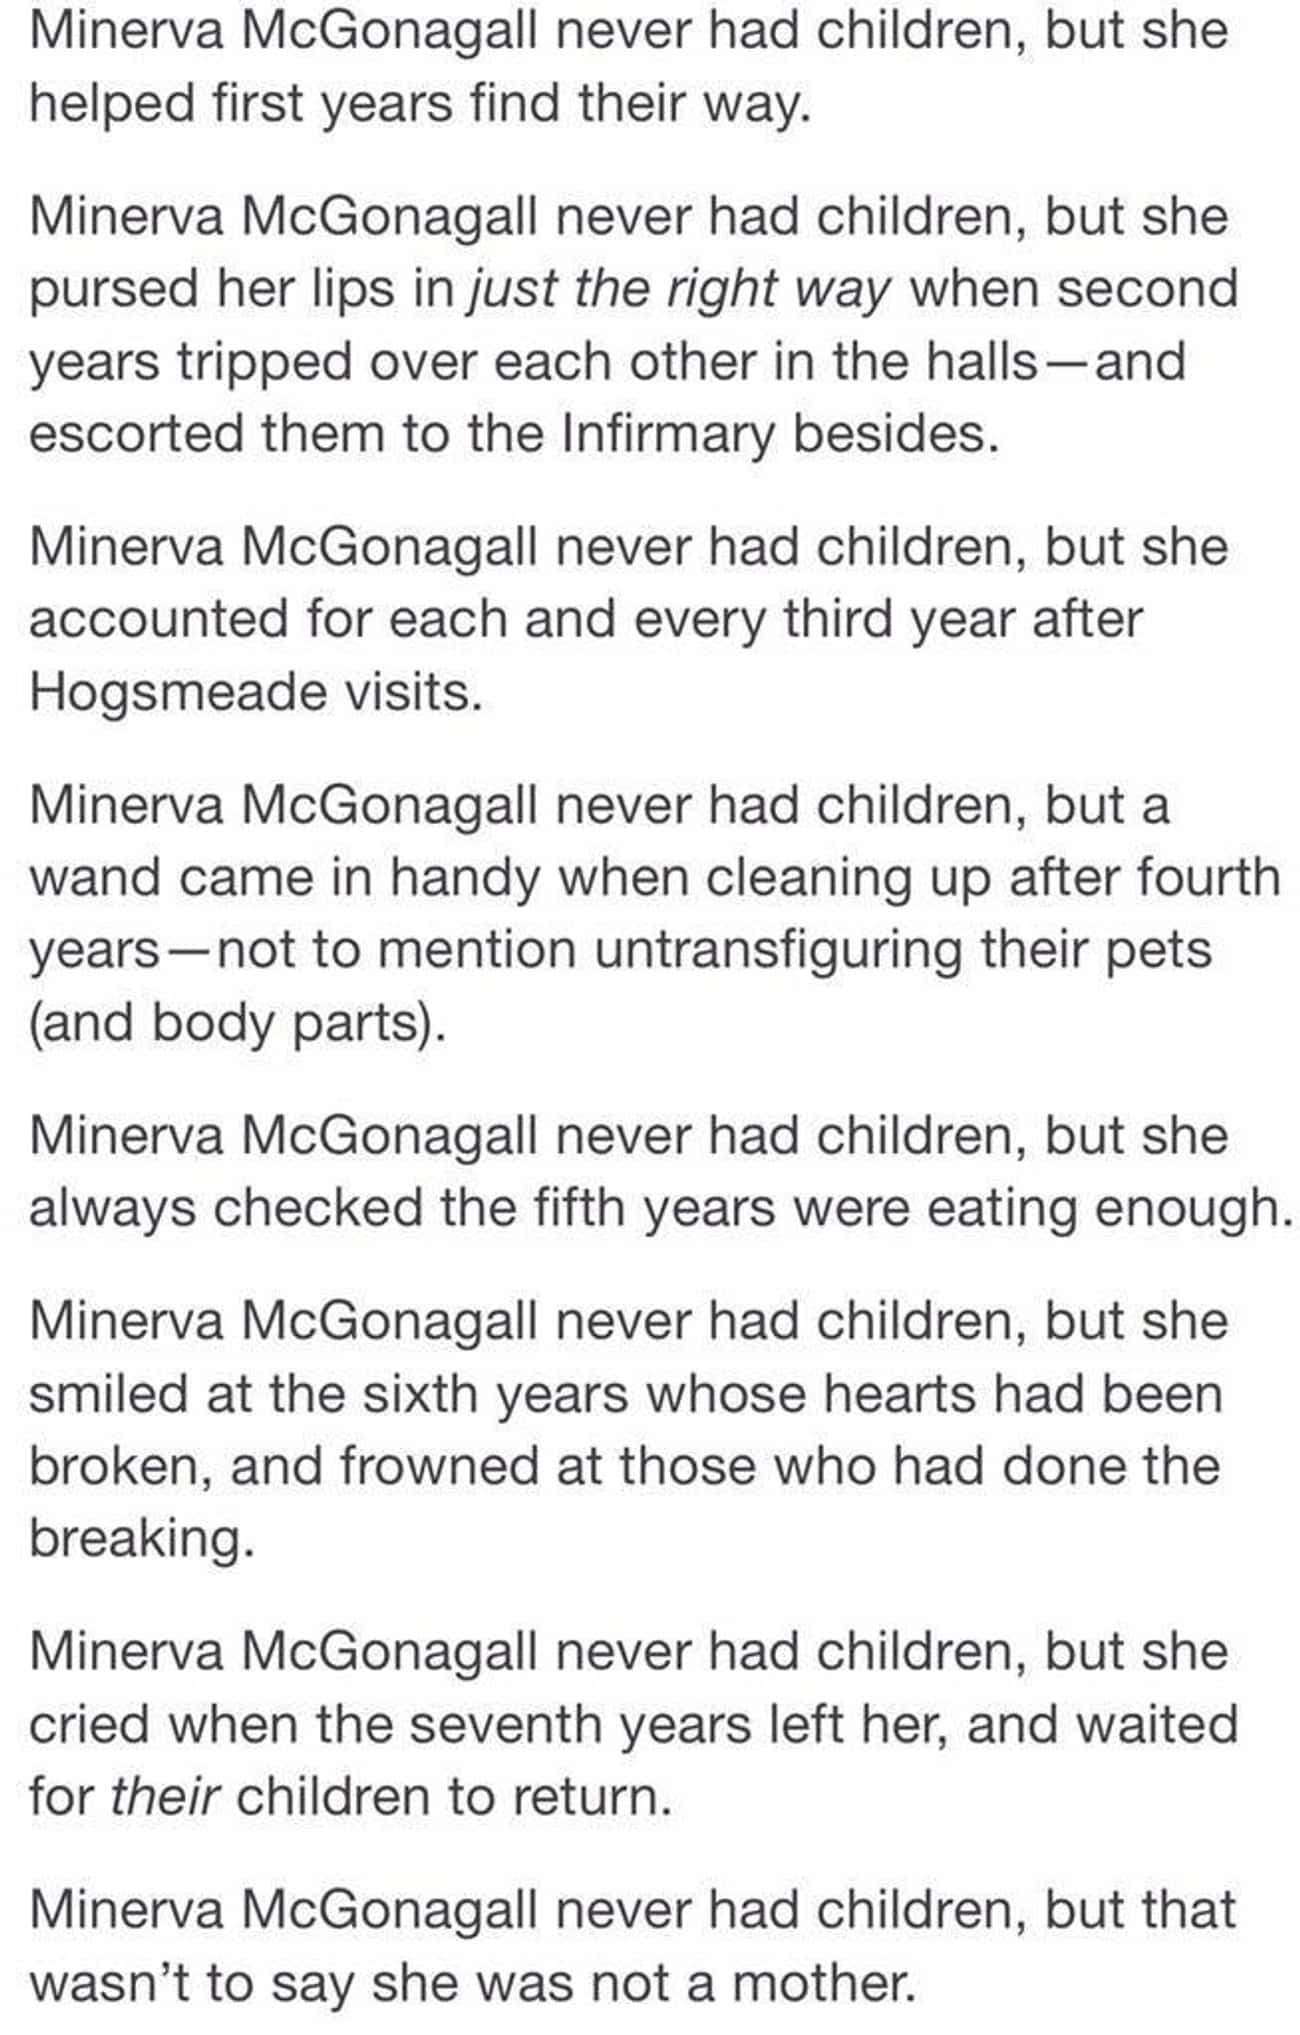 McGonagall Never Had Children, But She Was Still A Mother